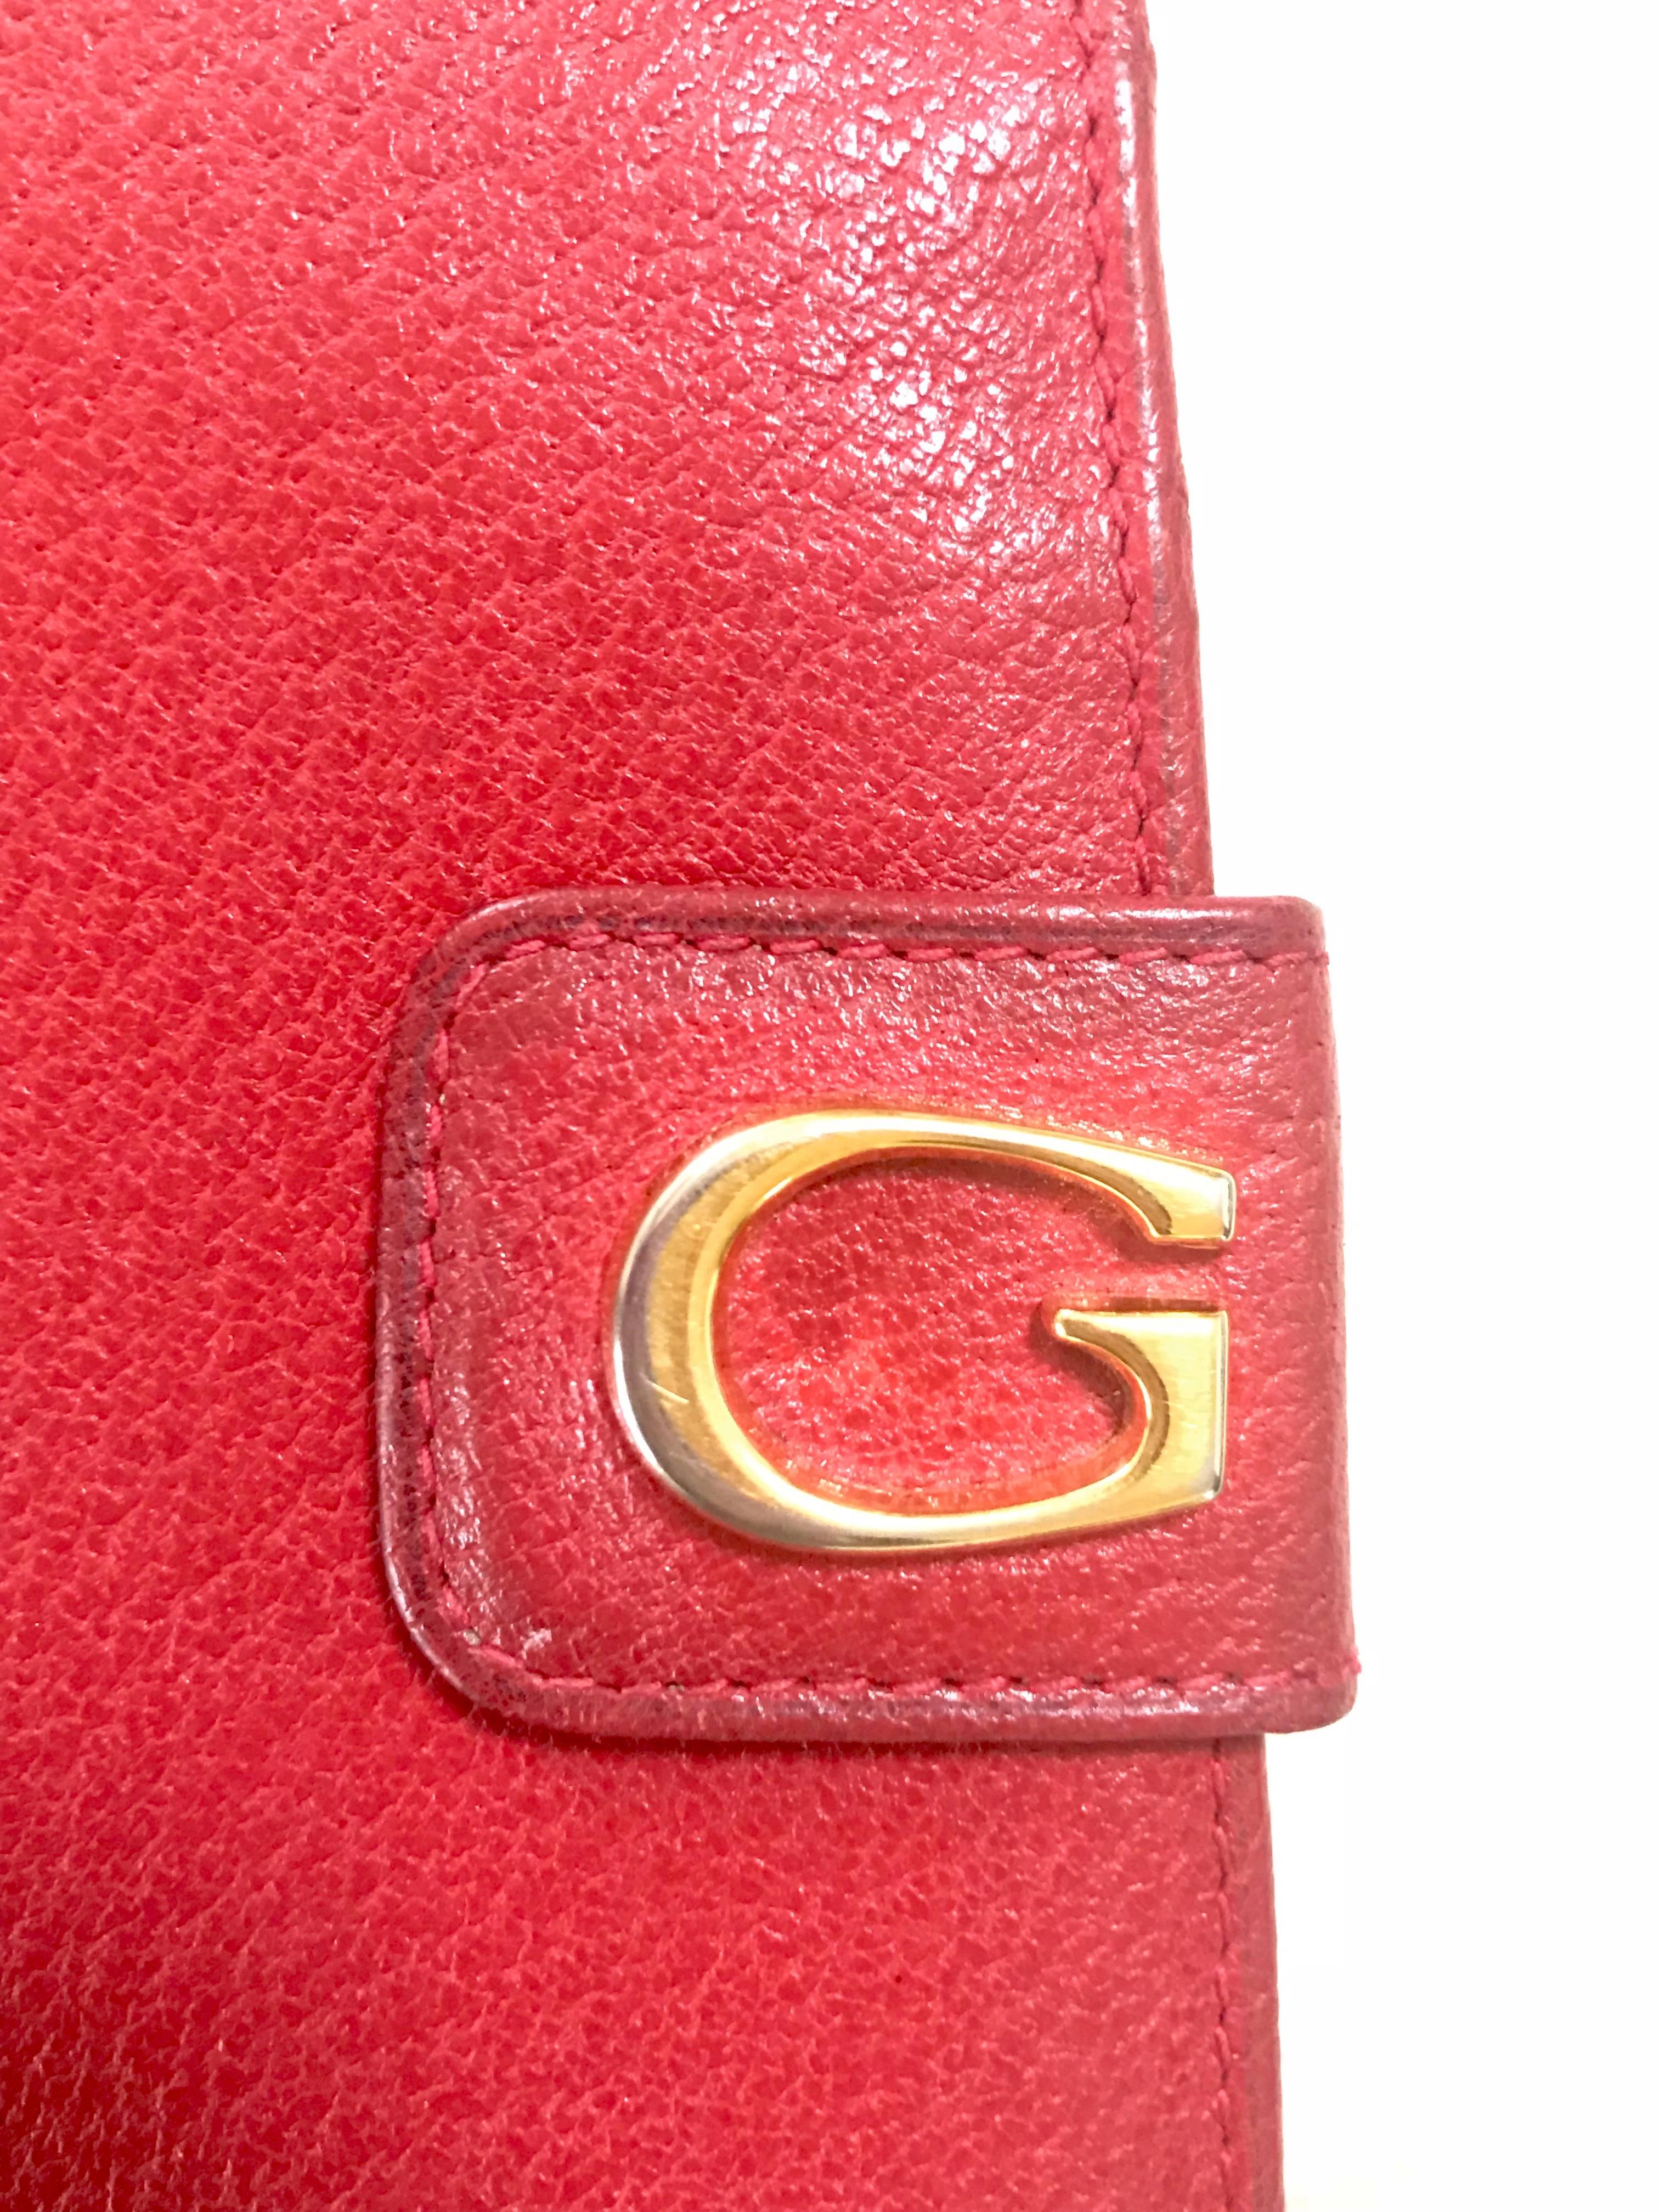 1980s. Vintage Gucci red pigskin leather wallet with golden G logo hardware closure. Great vintage gift. 

This is a classic Gucci vintage wallet in genuine red pigskin.

The closure hardware features its iconic golden 